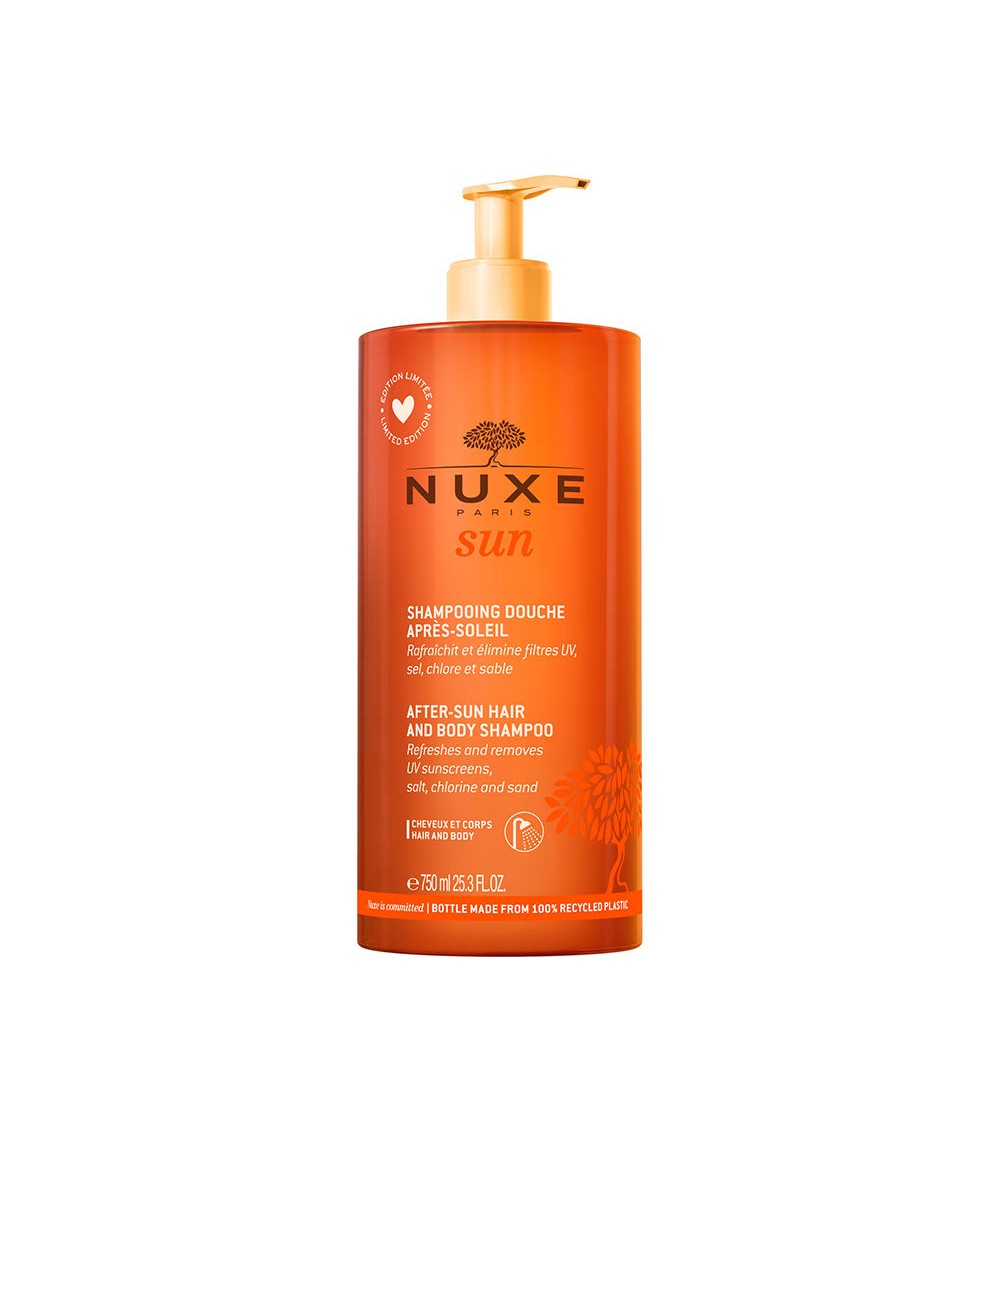 NUXE SUN shampooing corps et cheveux